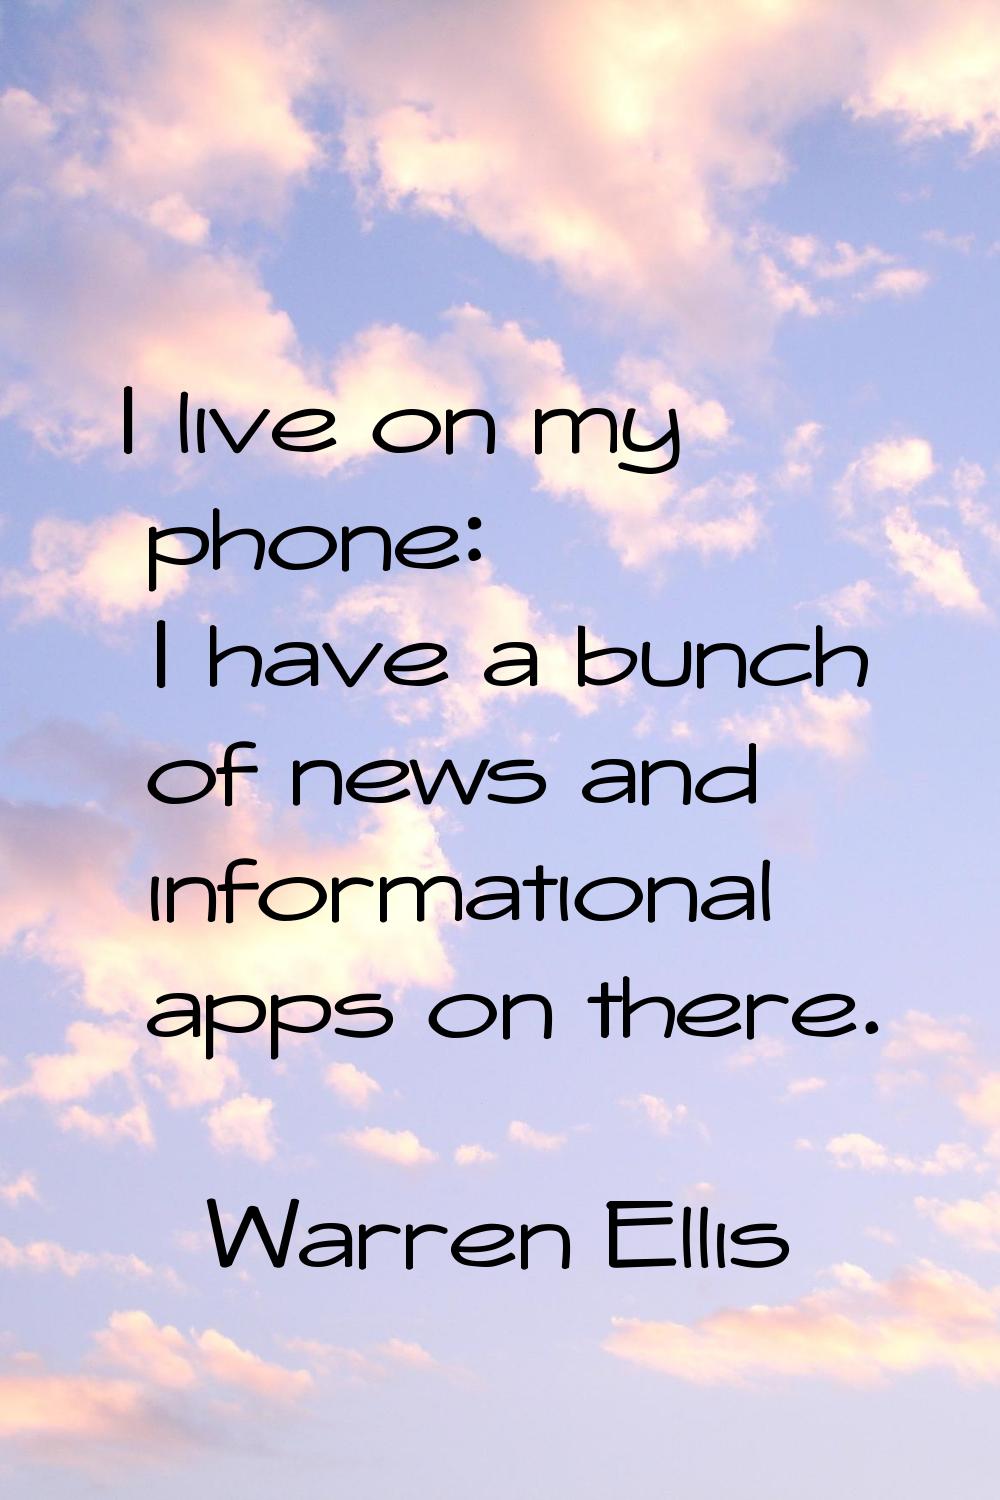 I live on my phone: I have a bunch of news and informational apps on there.